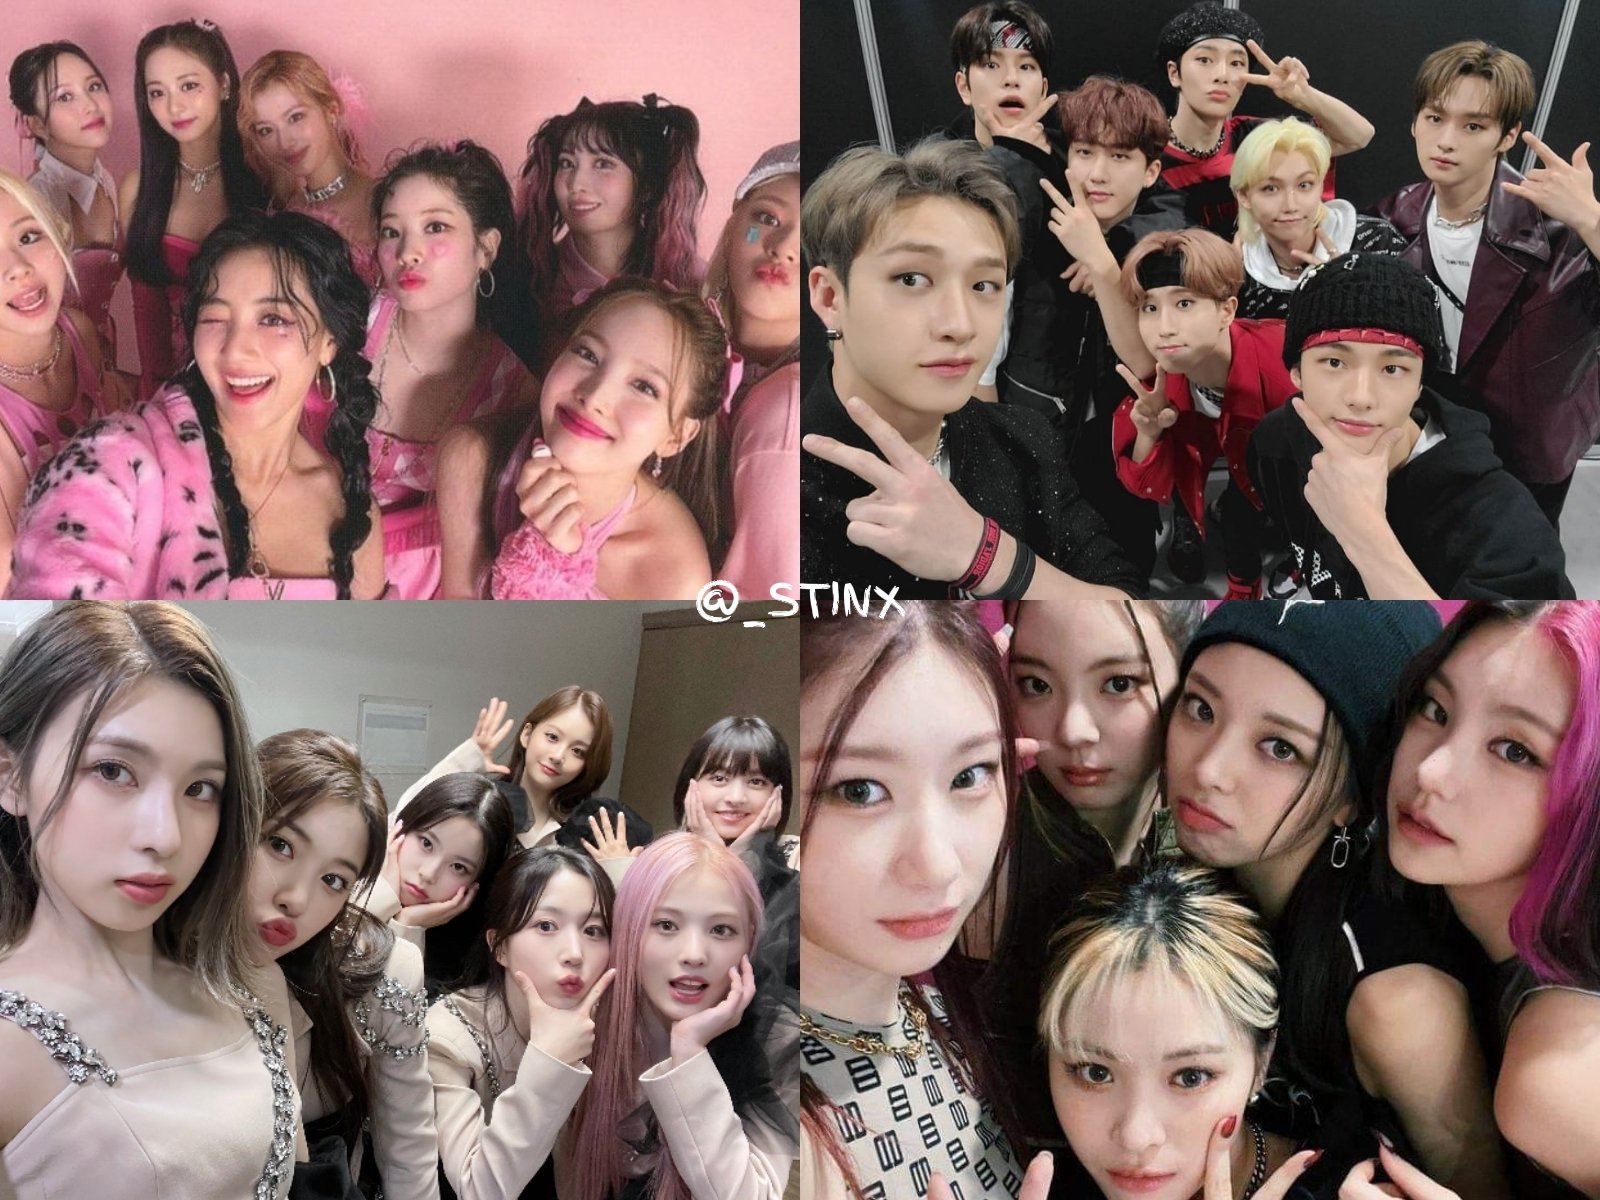 STWINX: Stray Kids/TWICE/ITZY/NMIXX on Twitter: "@NMIXX_official Hi! This  is a new account dedicated to posting content about JYPE's Big 4: #TWICE,  #StrayKids, #ITZY and #NMIXX . Please retweet so we can gain